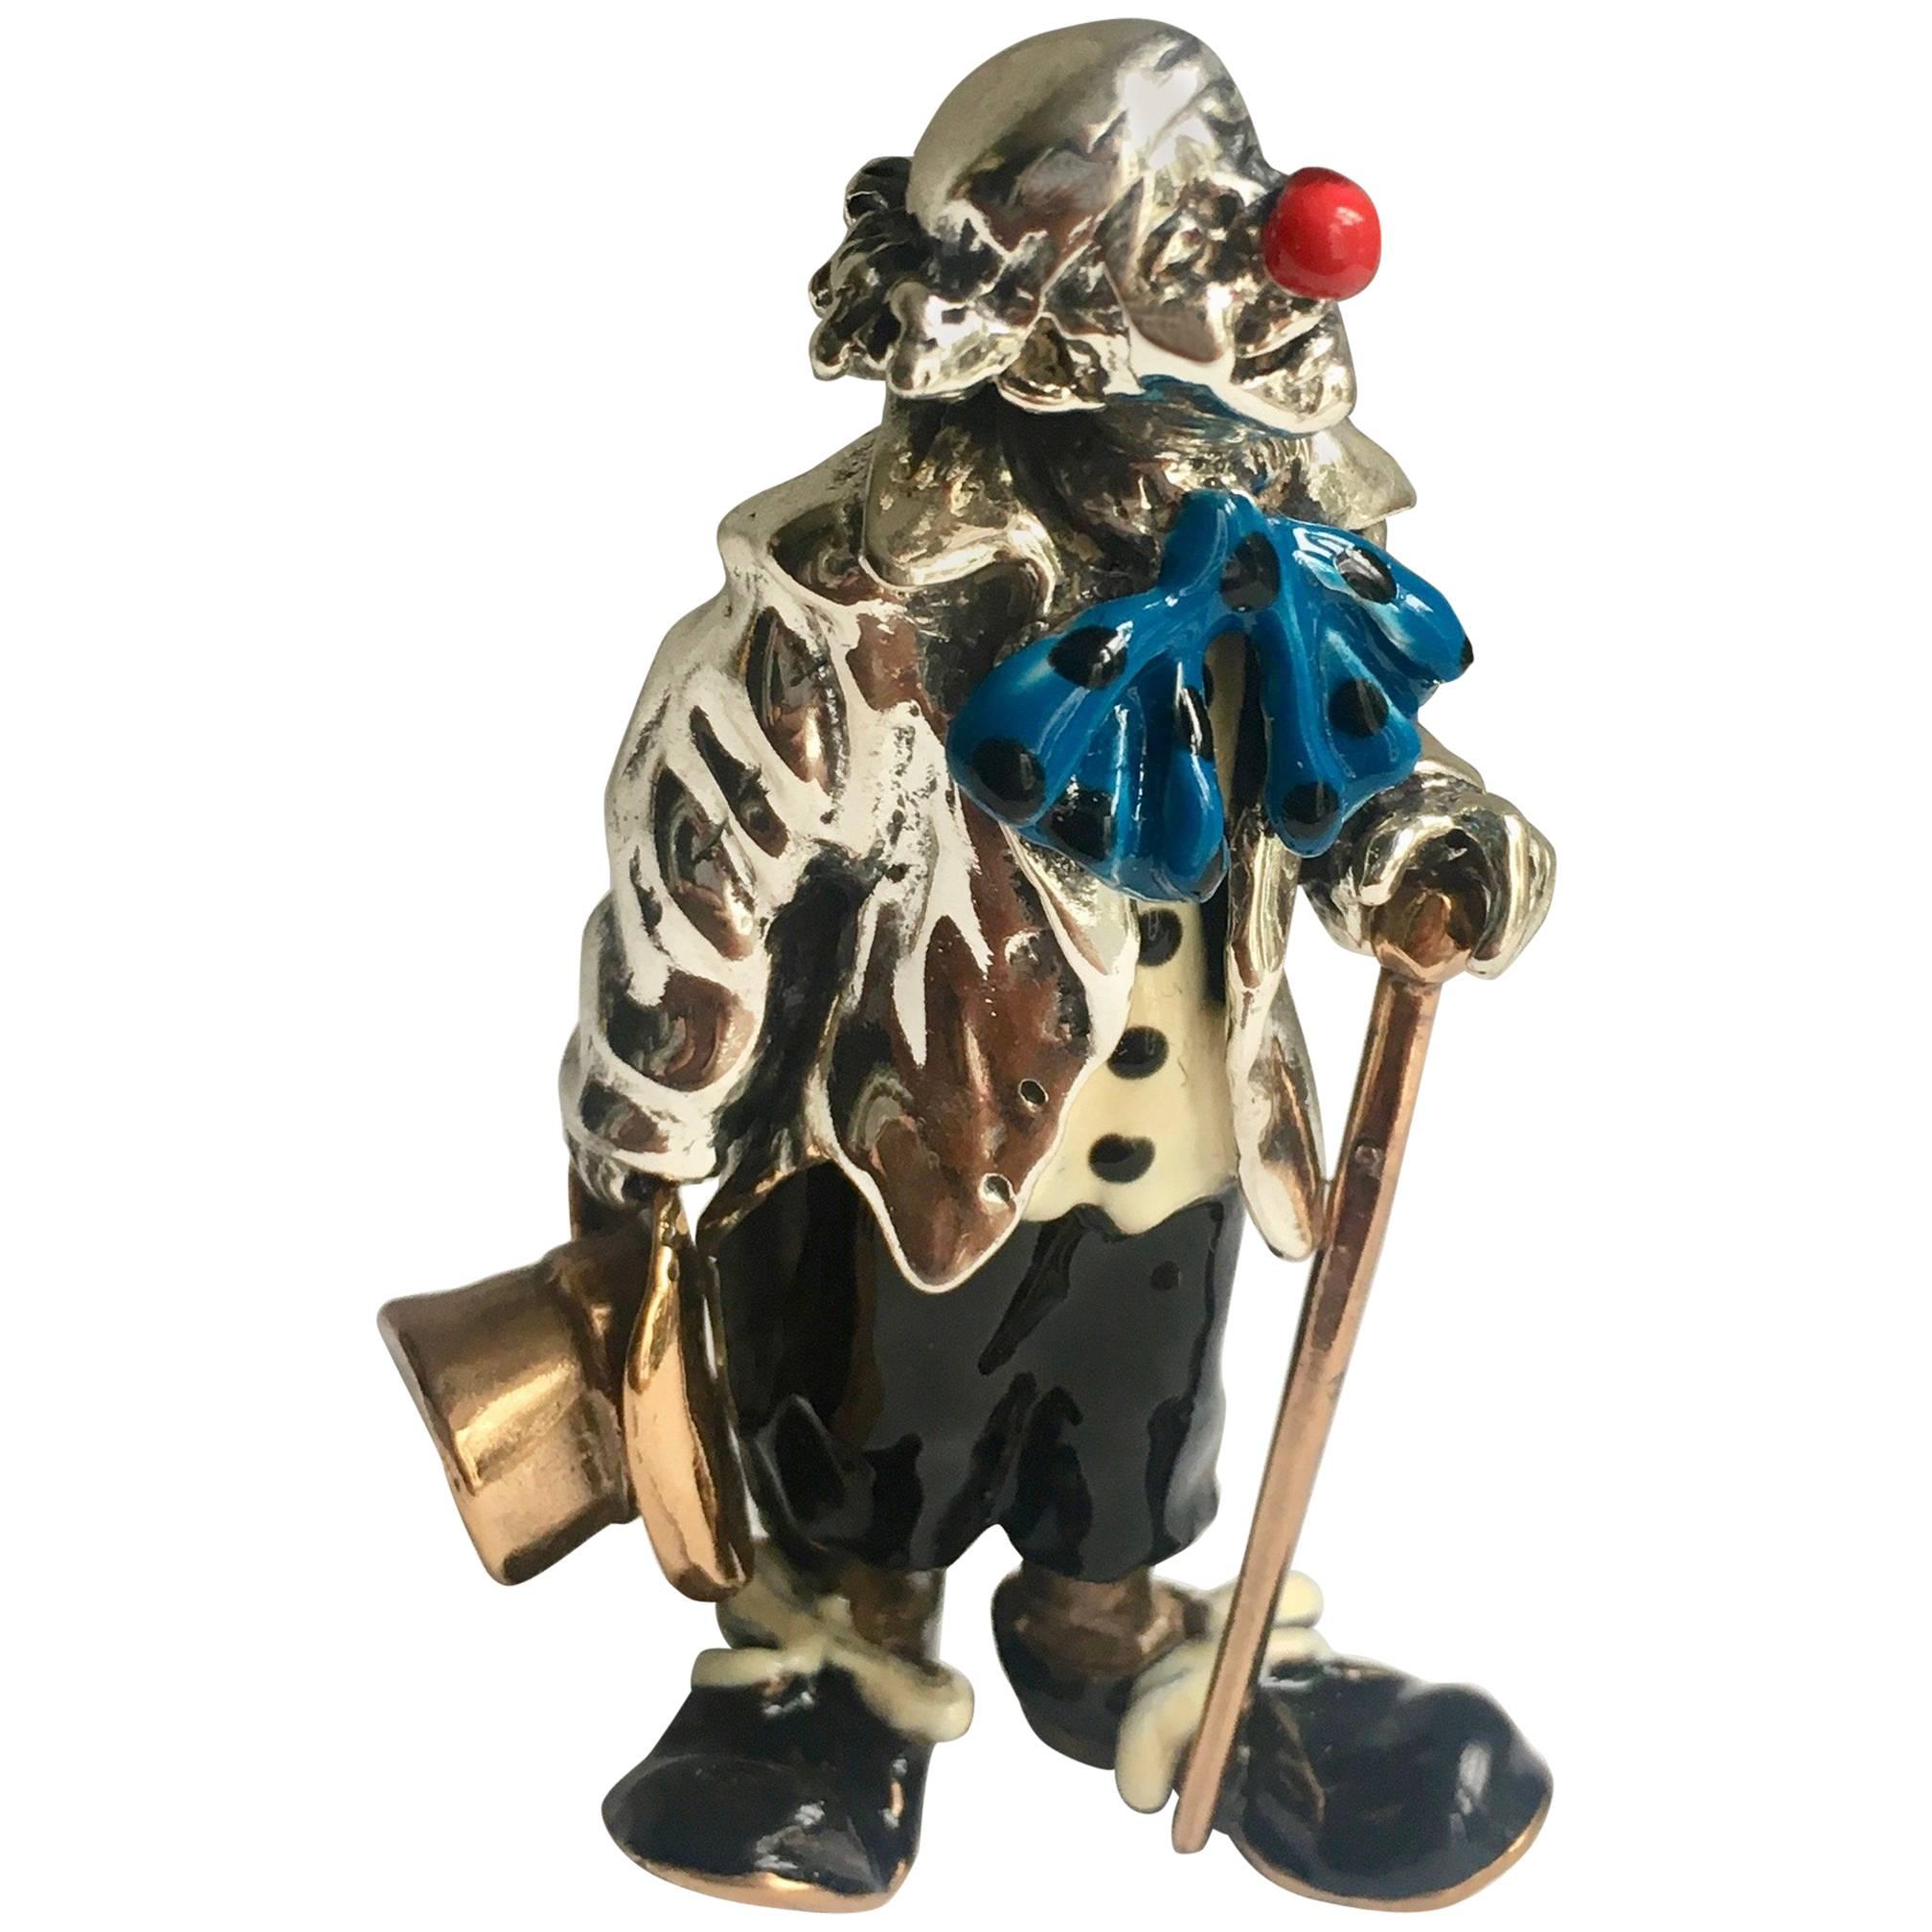 Sterling Silver and Enamel Clown Figure after Tiffany & Co., Gene Moore